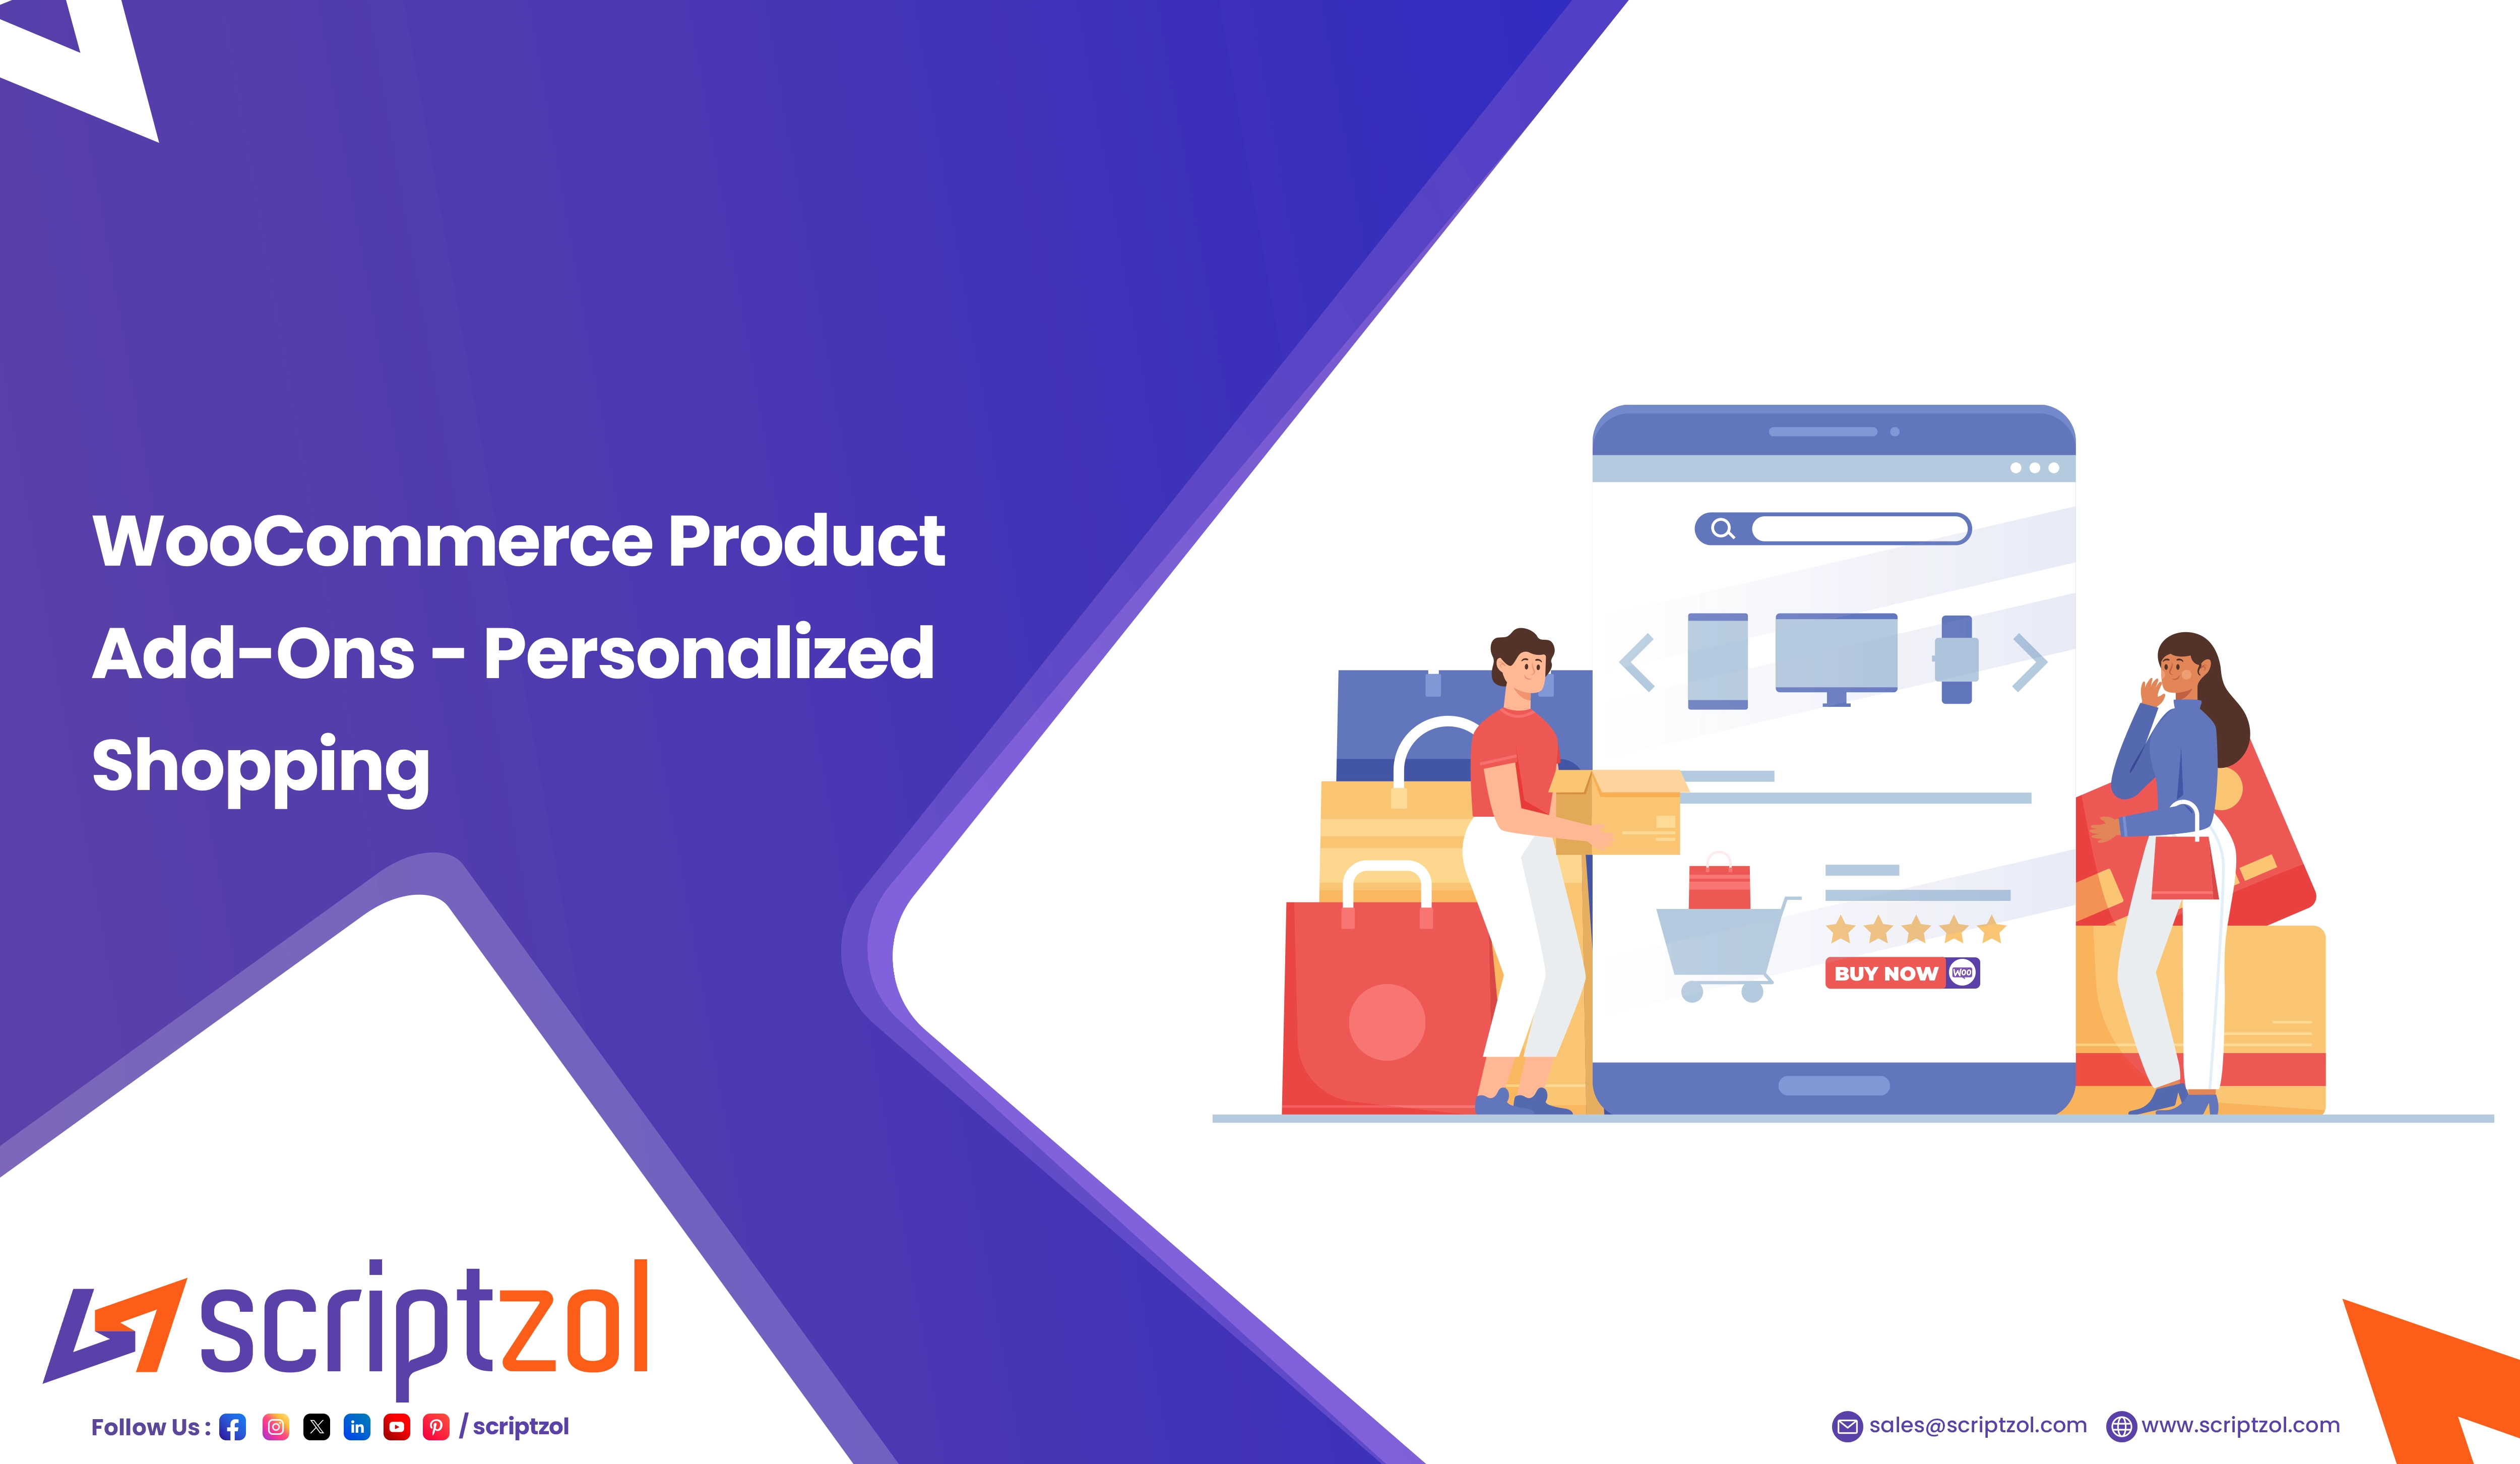 WooCommerce Product Add-Ons - Personalized Shopping